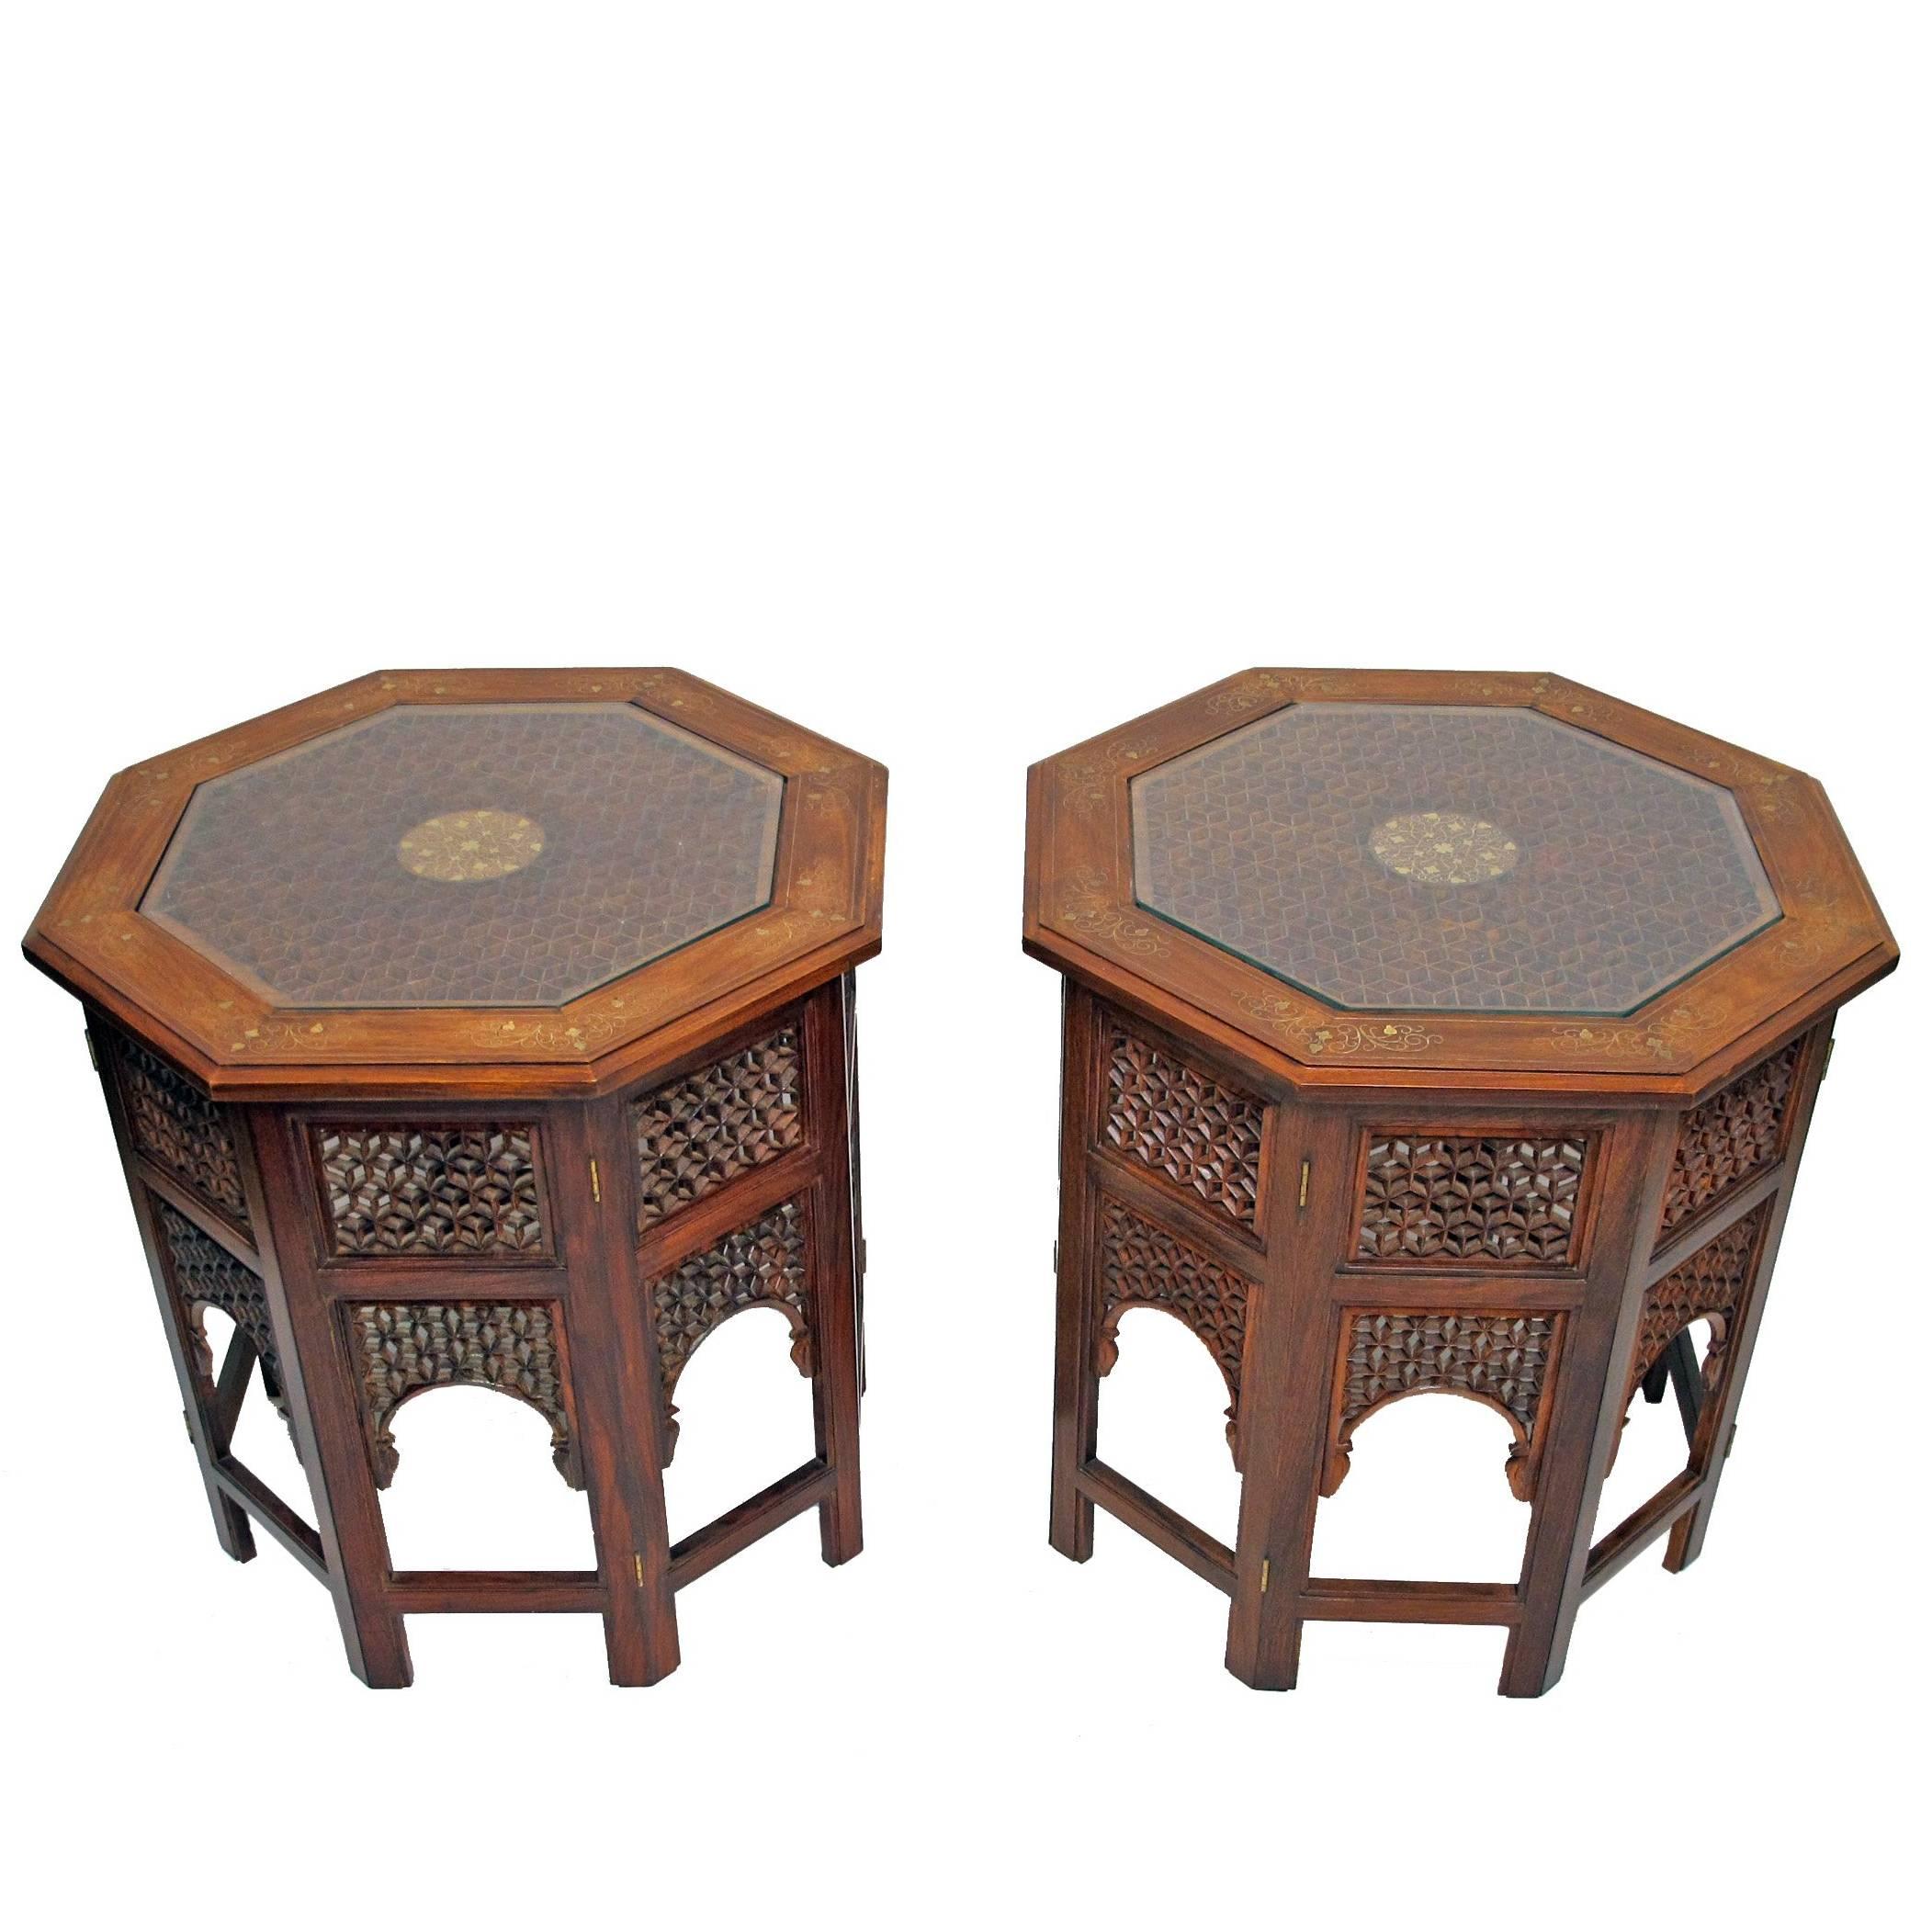 Pair of Octagonal Brass Inlaid Tabouret Side Tables